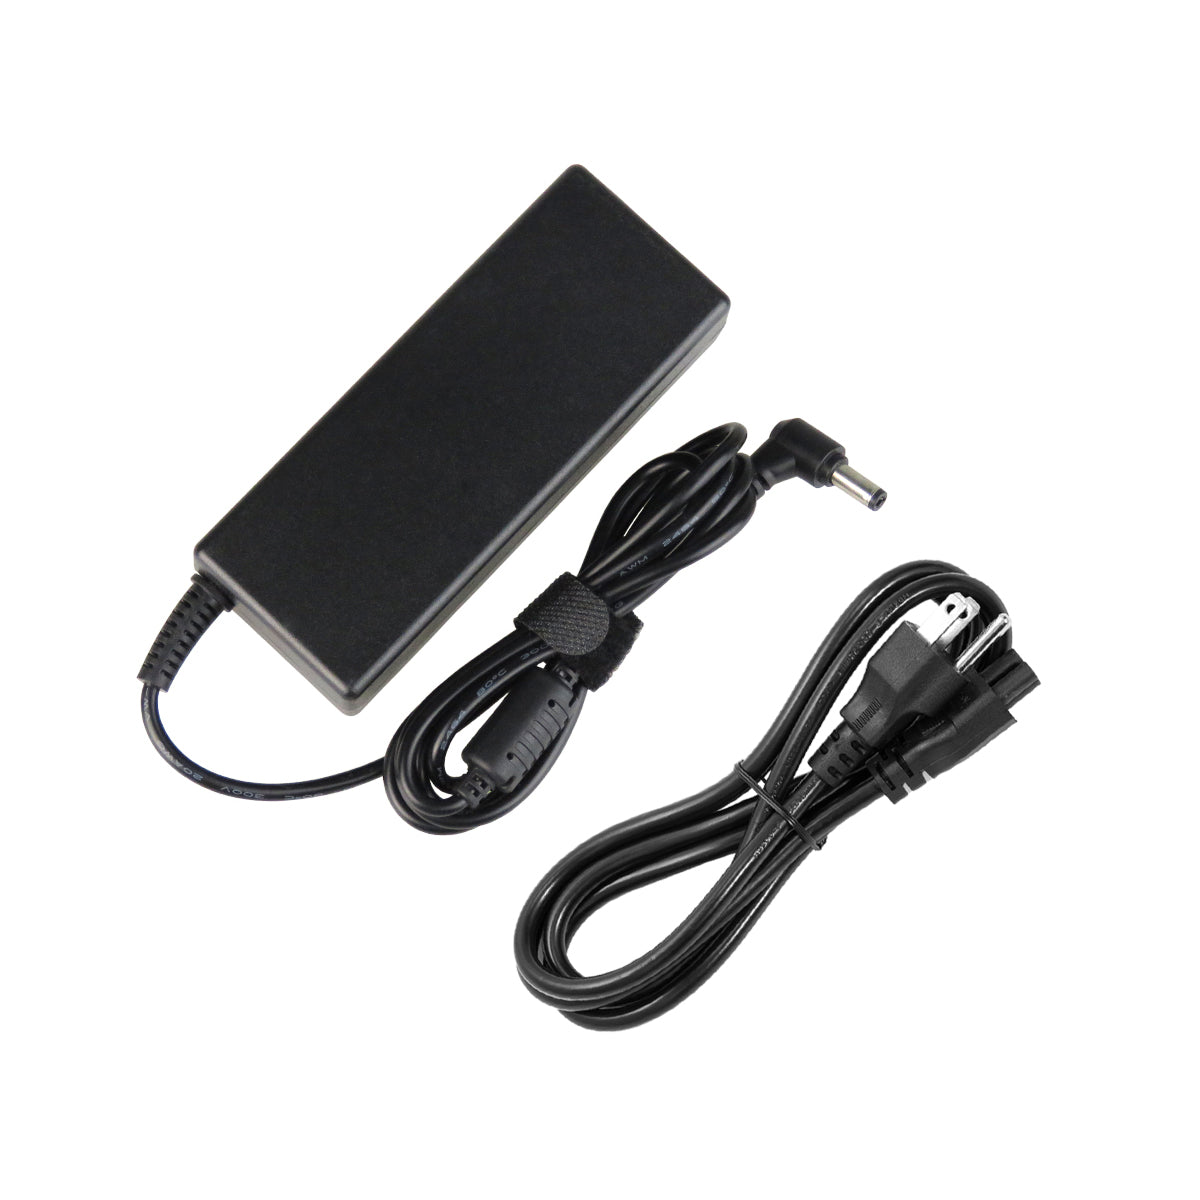 AC Adapter Charger for ASUS X62 Notebook.